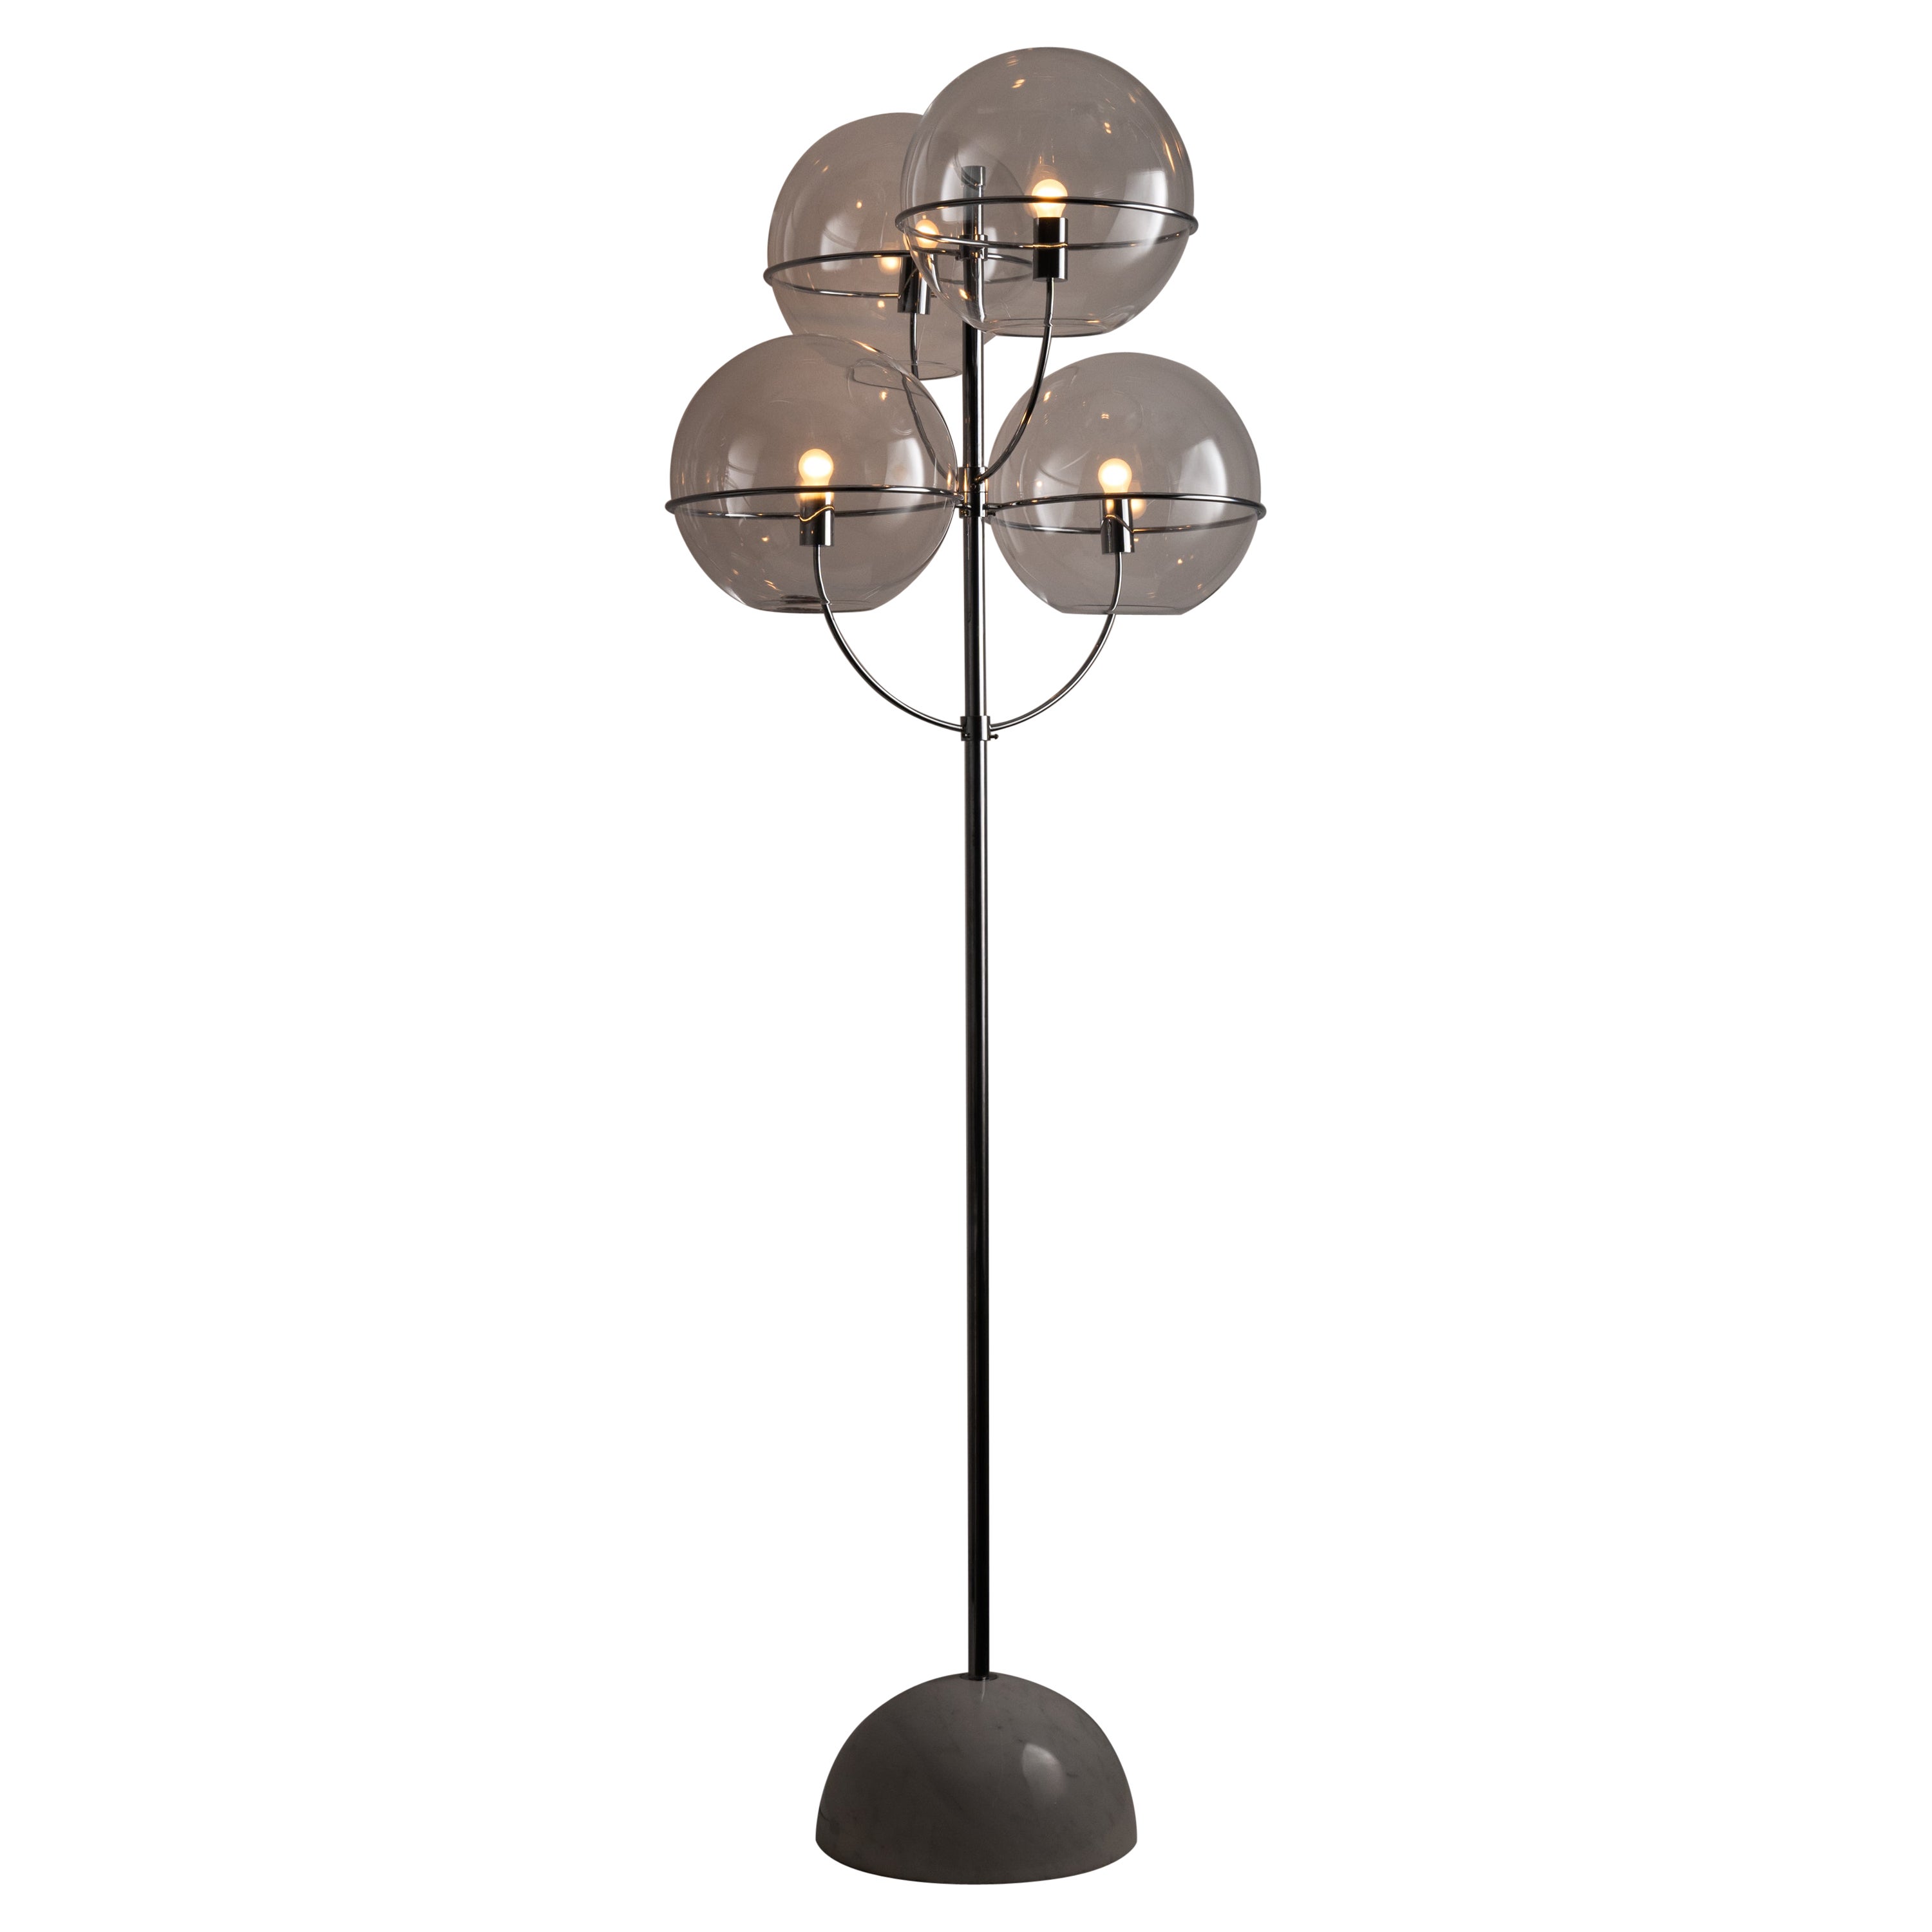 Large and Rare 'Lyndon' Floor Lamp by Vico Magistretti for Knoll For Sale